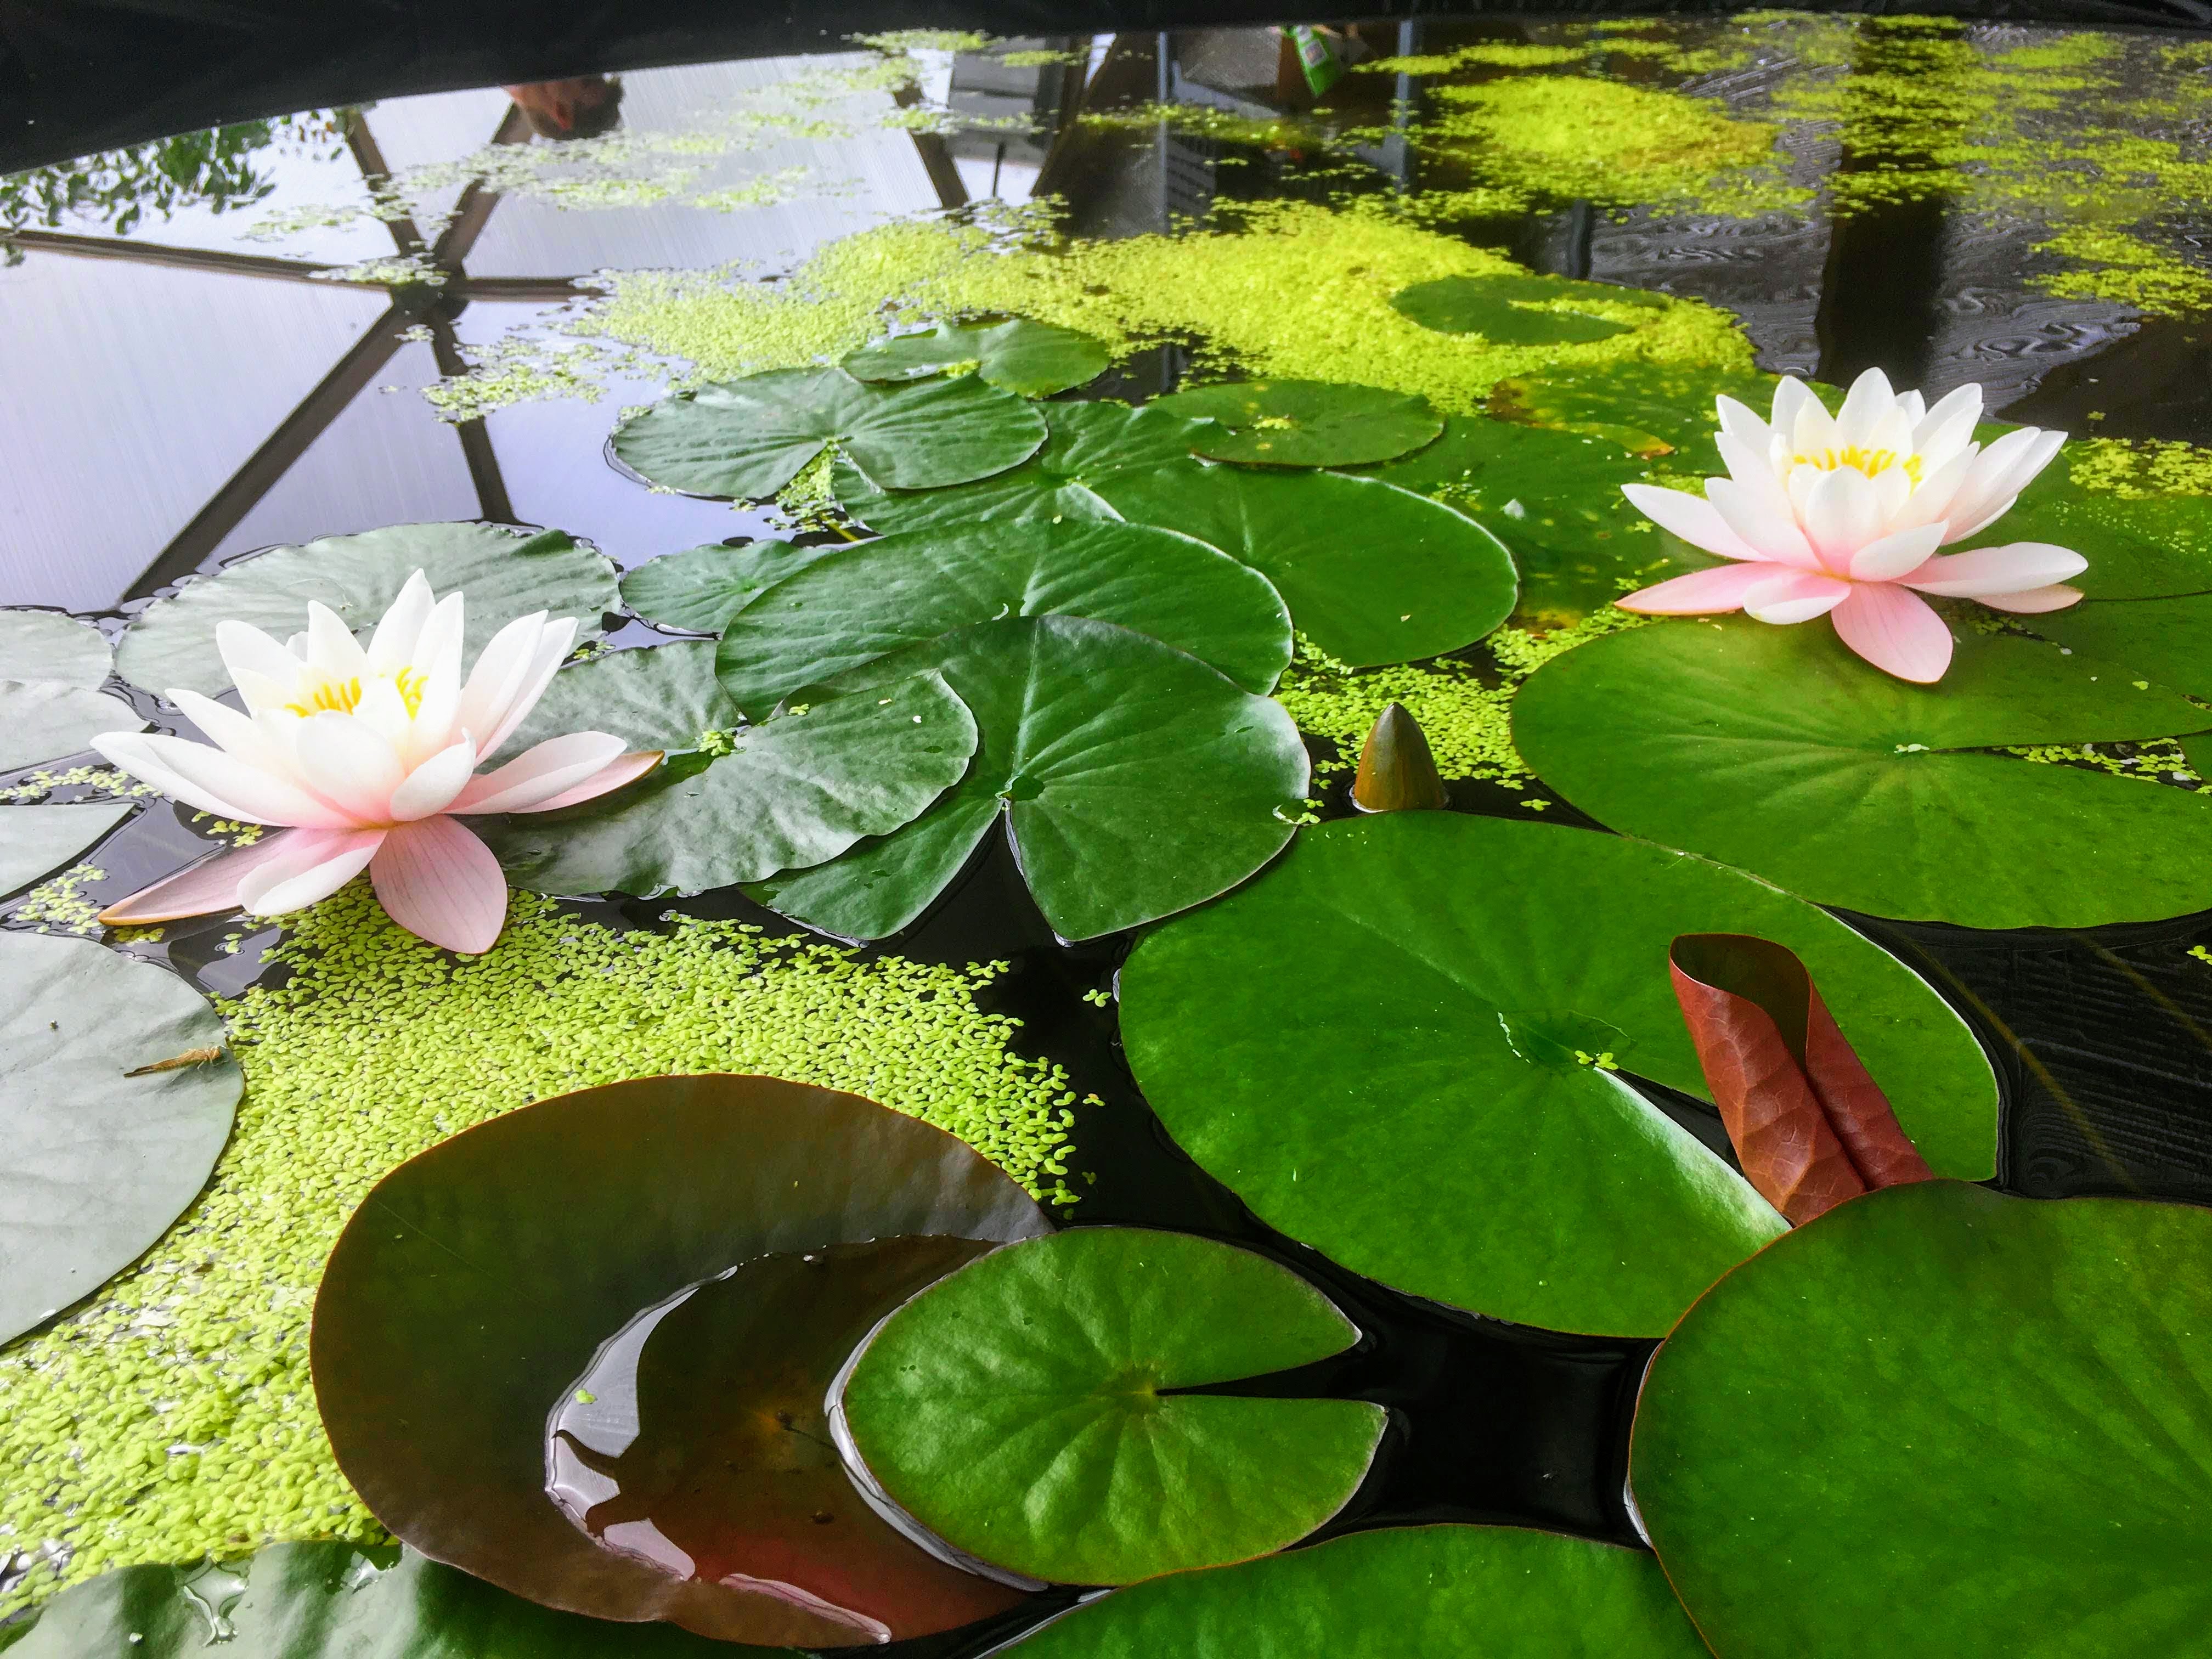 Lilly pads in dome pond